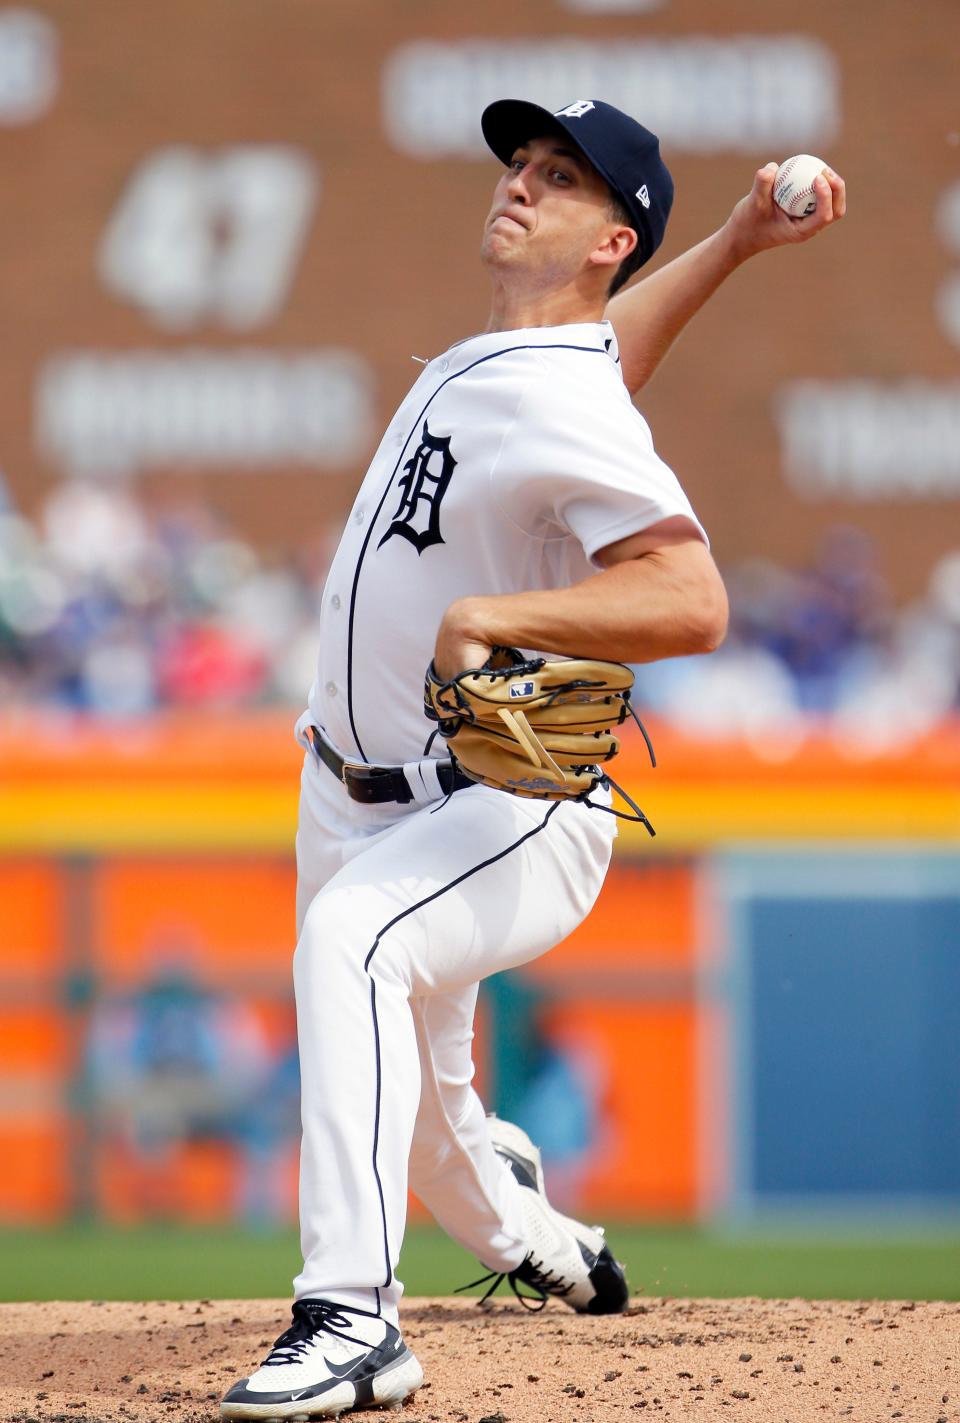 Beau Brieske (63) of the Detroit Tigers pitches against the Toronto Blue Jays during the second inning at Comerica Park on June 11, 2022, in Detroit, Michigan.